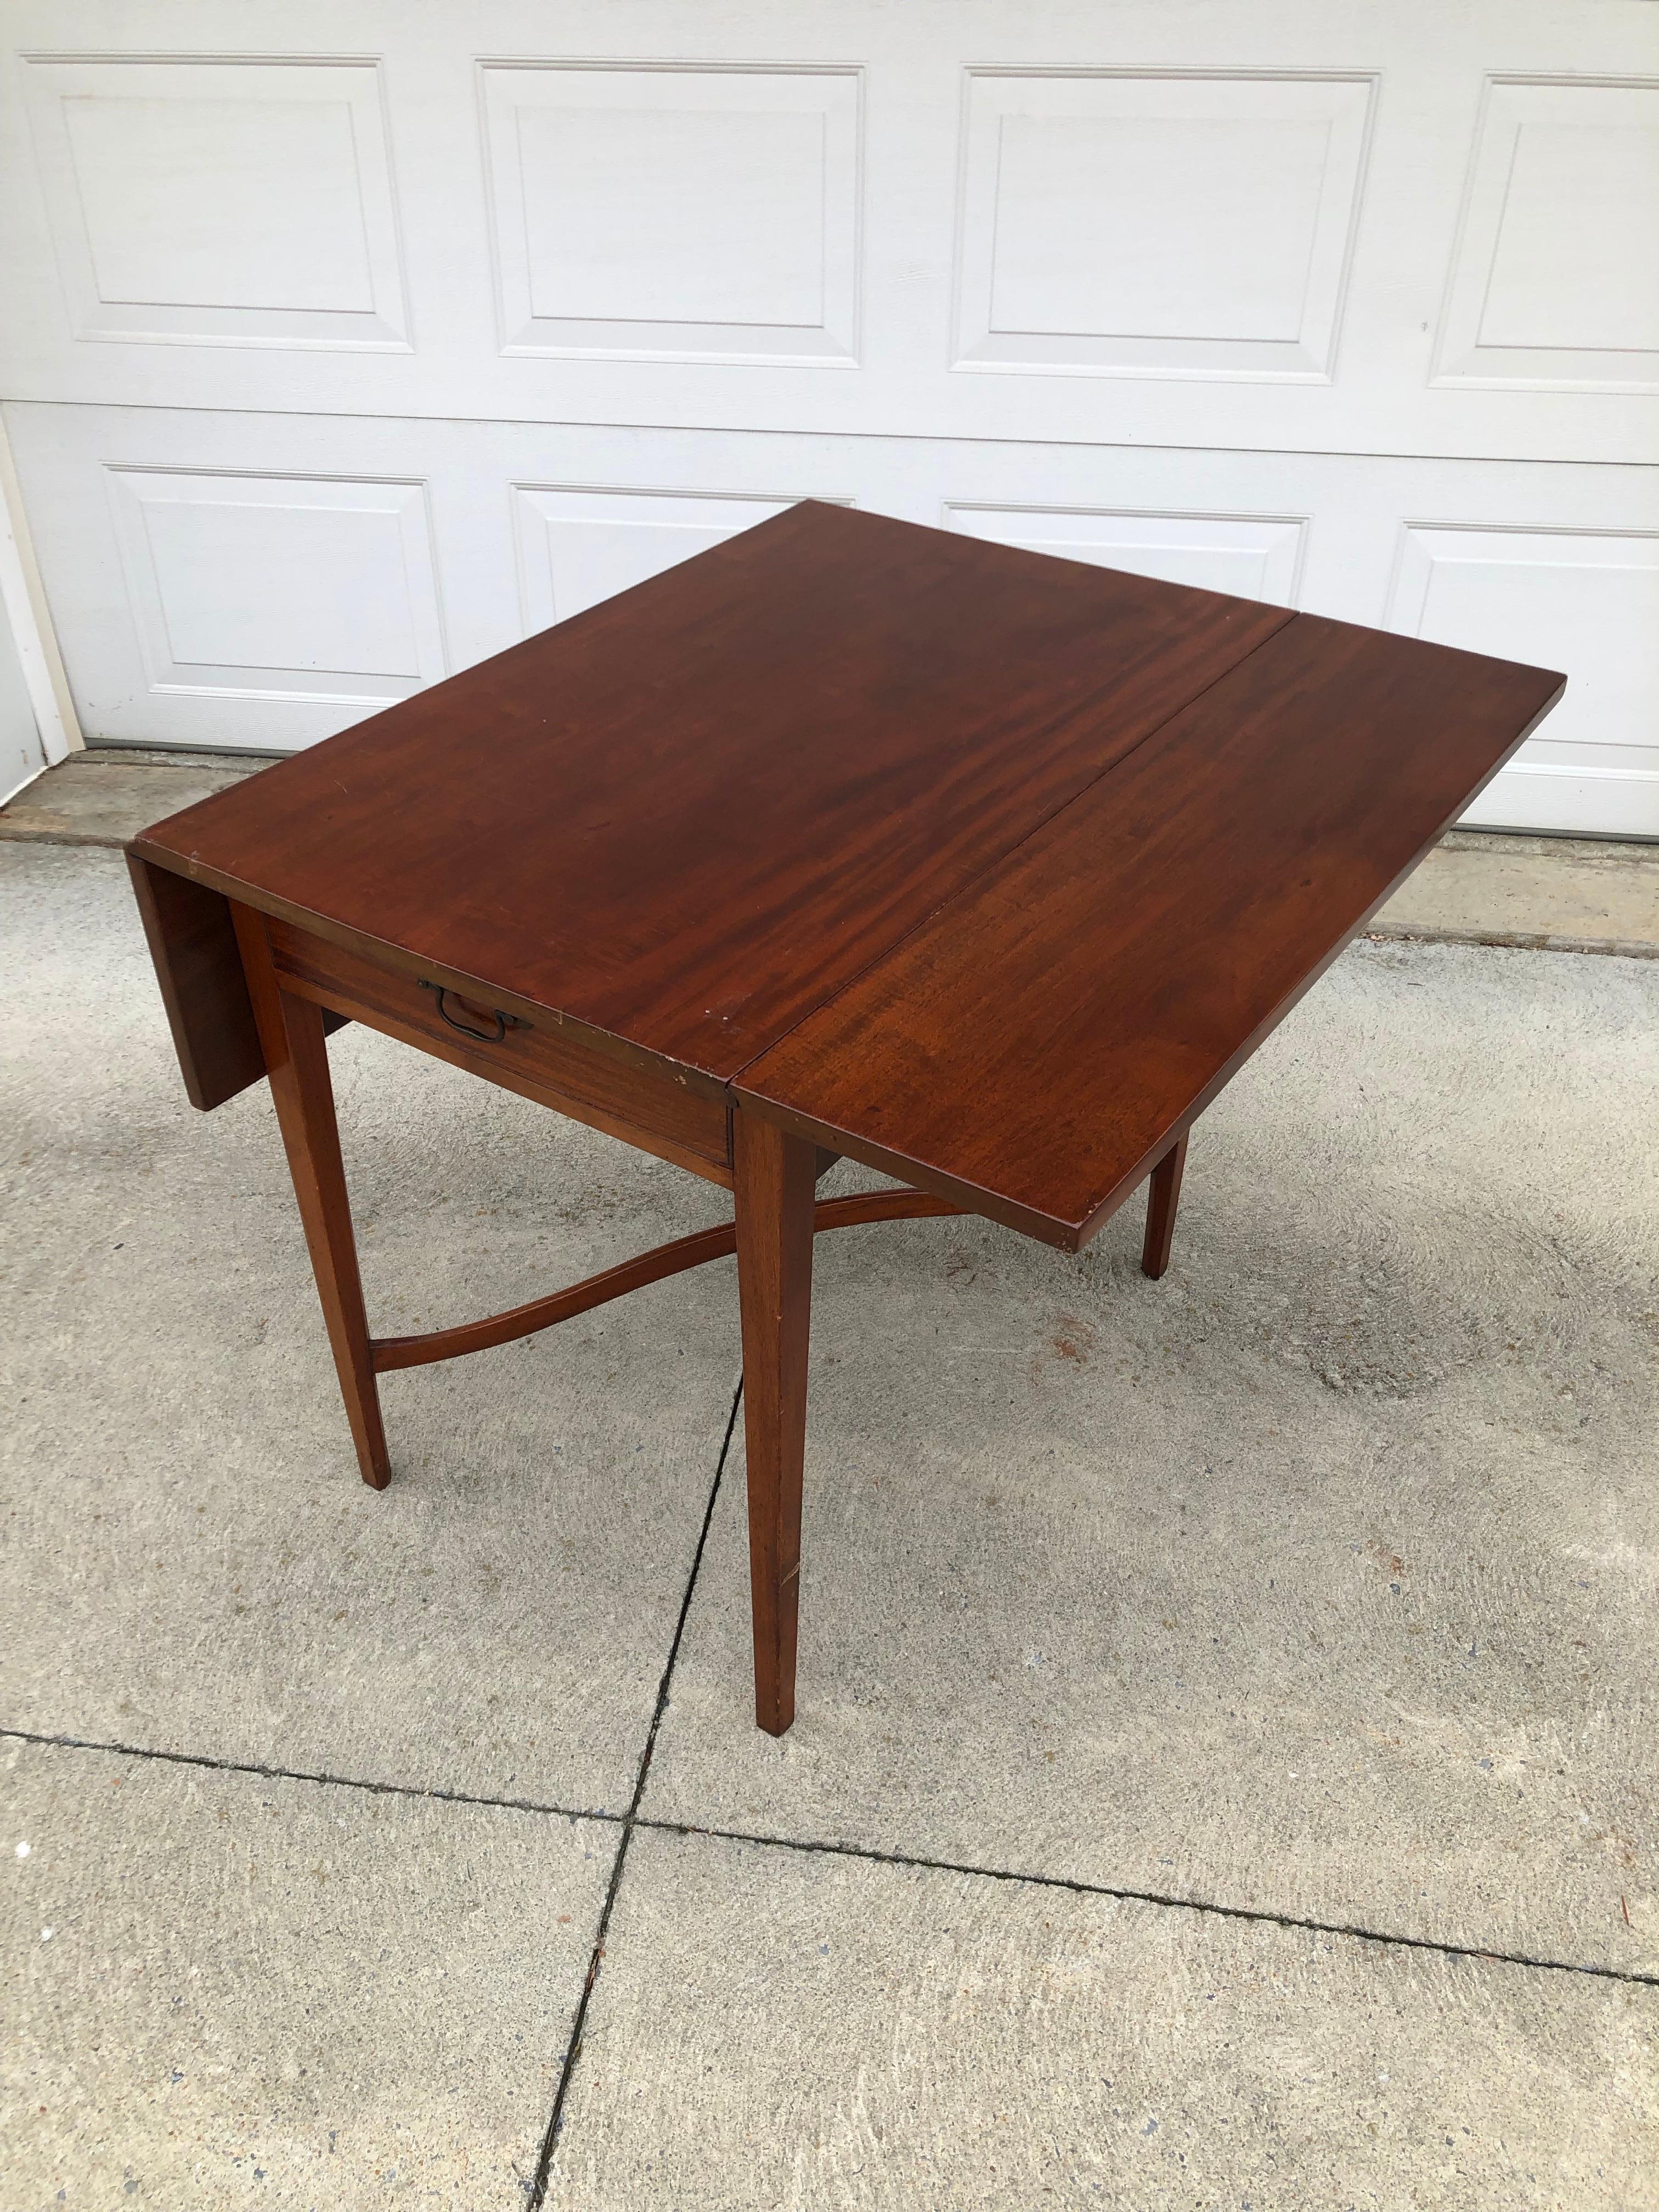 Walnut Chippendale Pembroke Table Tapered Legs, Arched Stretcher Pennsylvania In Good Condition For Sale In Allentown, PA